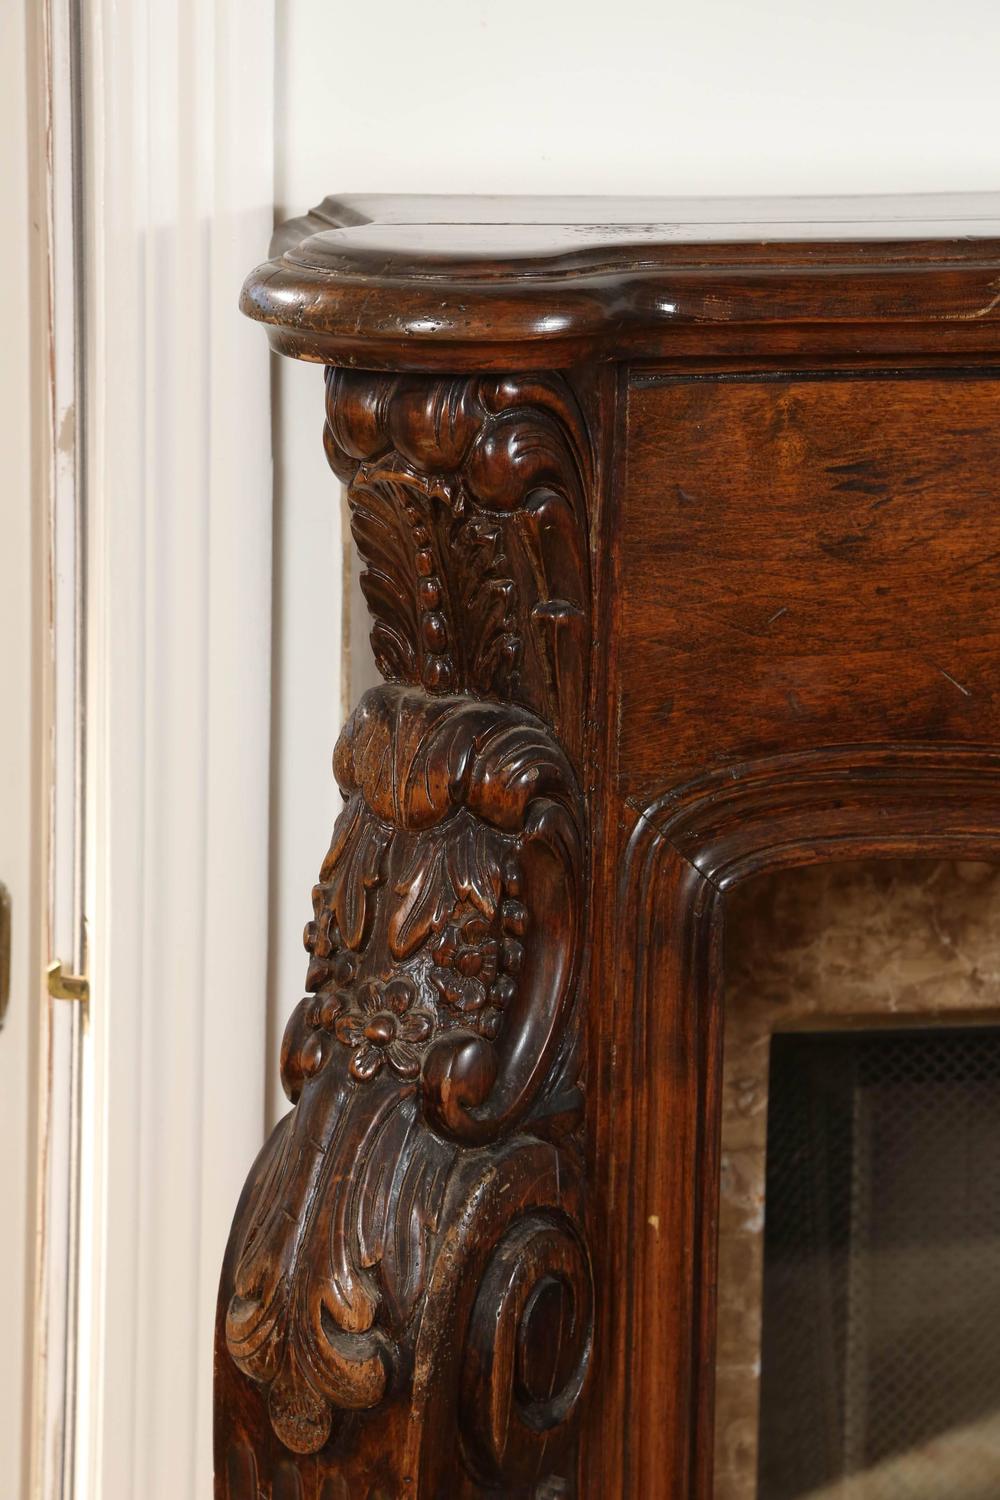 Carved fireplace, Wooden mantel, Rustic fireplace mantels